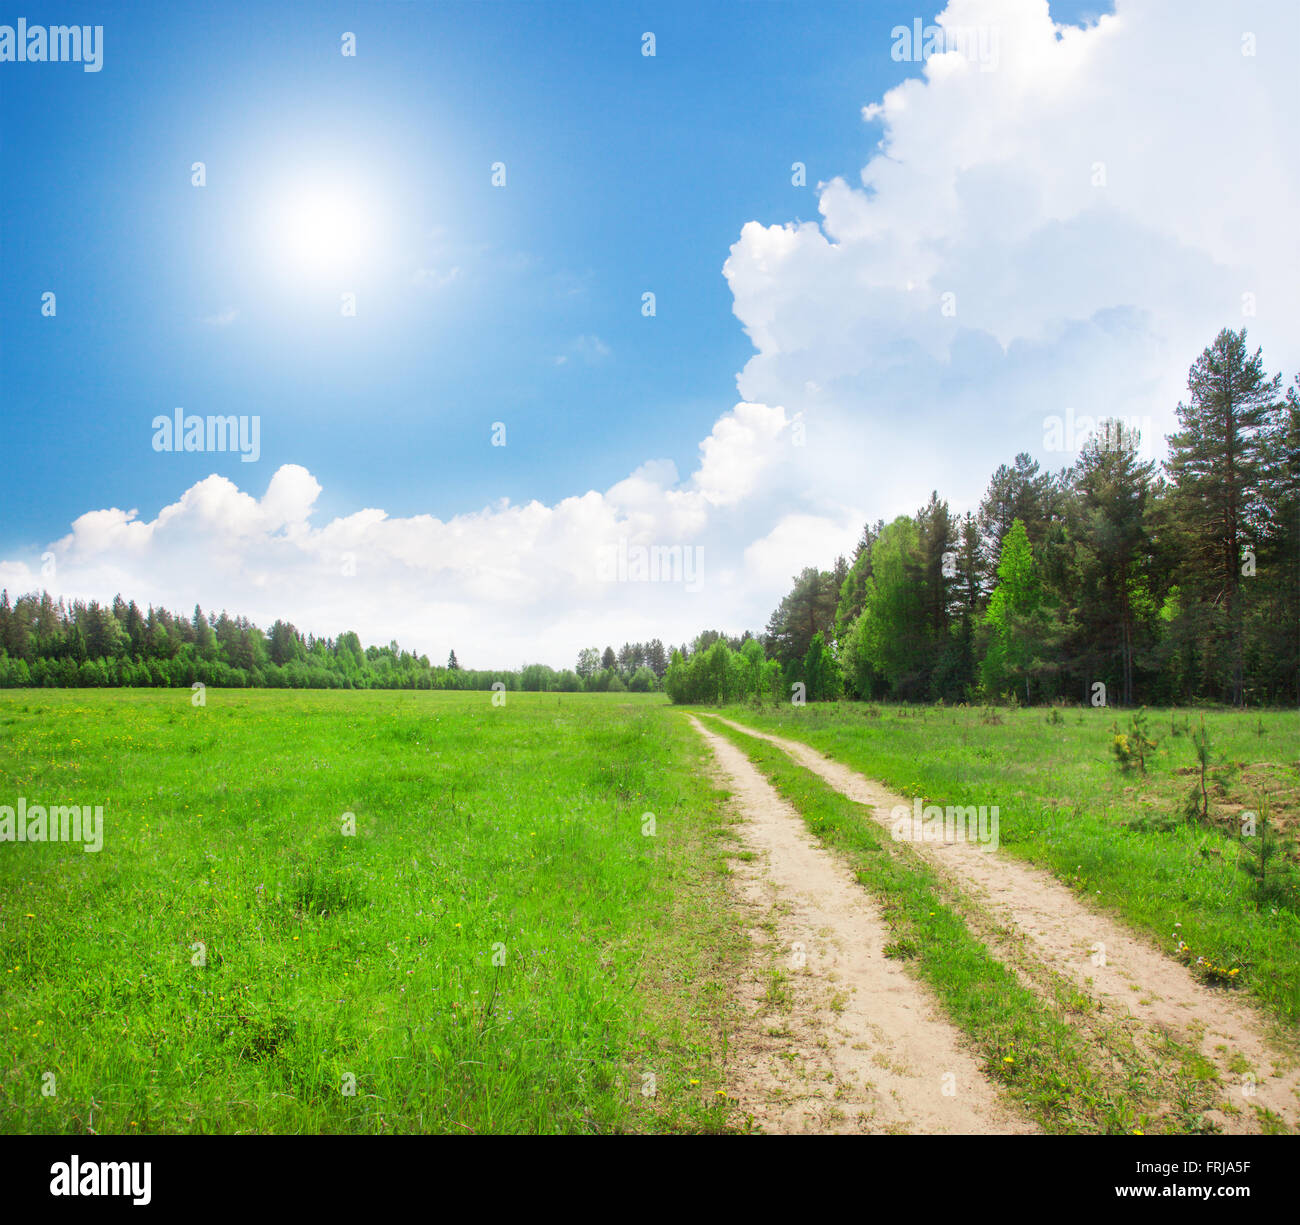 Road in forest and beautiful blue sky with white clouds Stock Photo